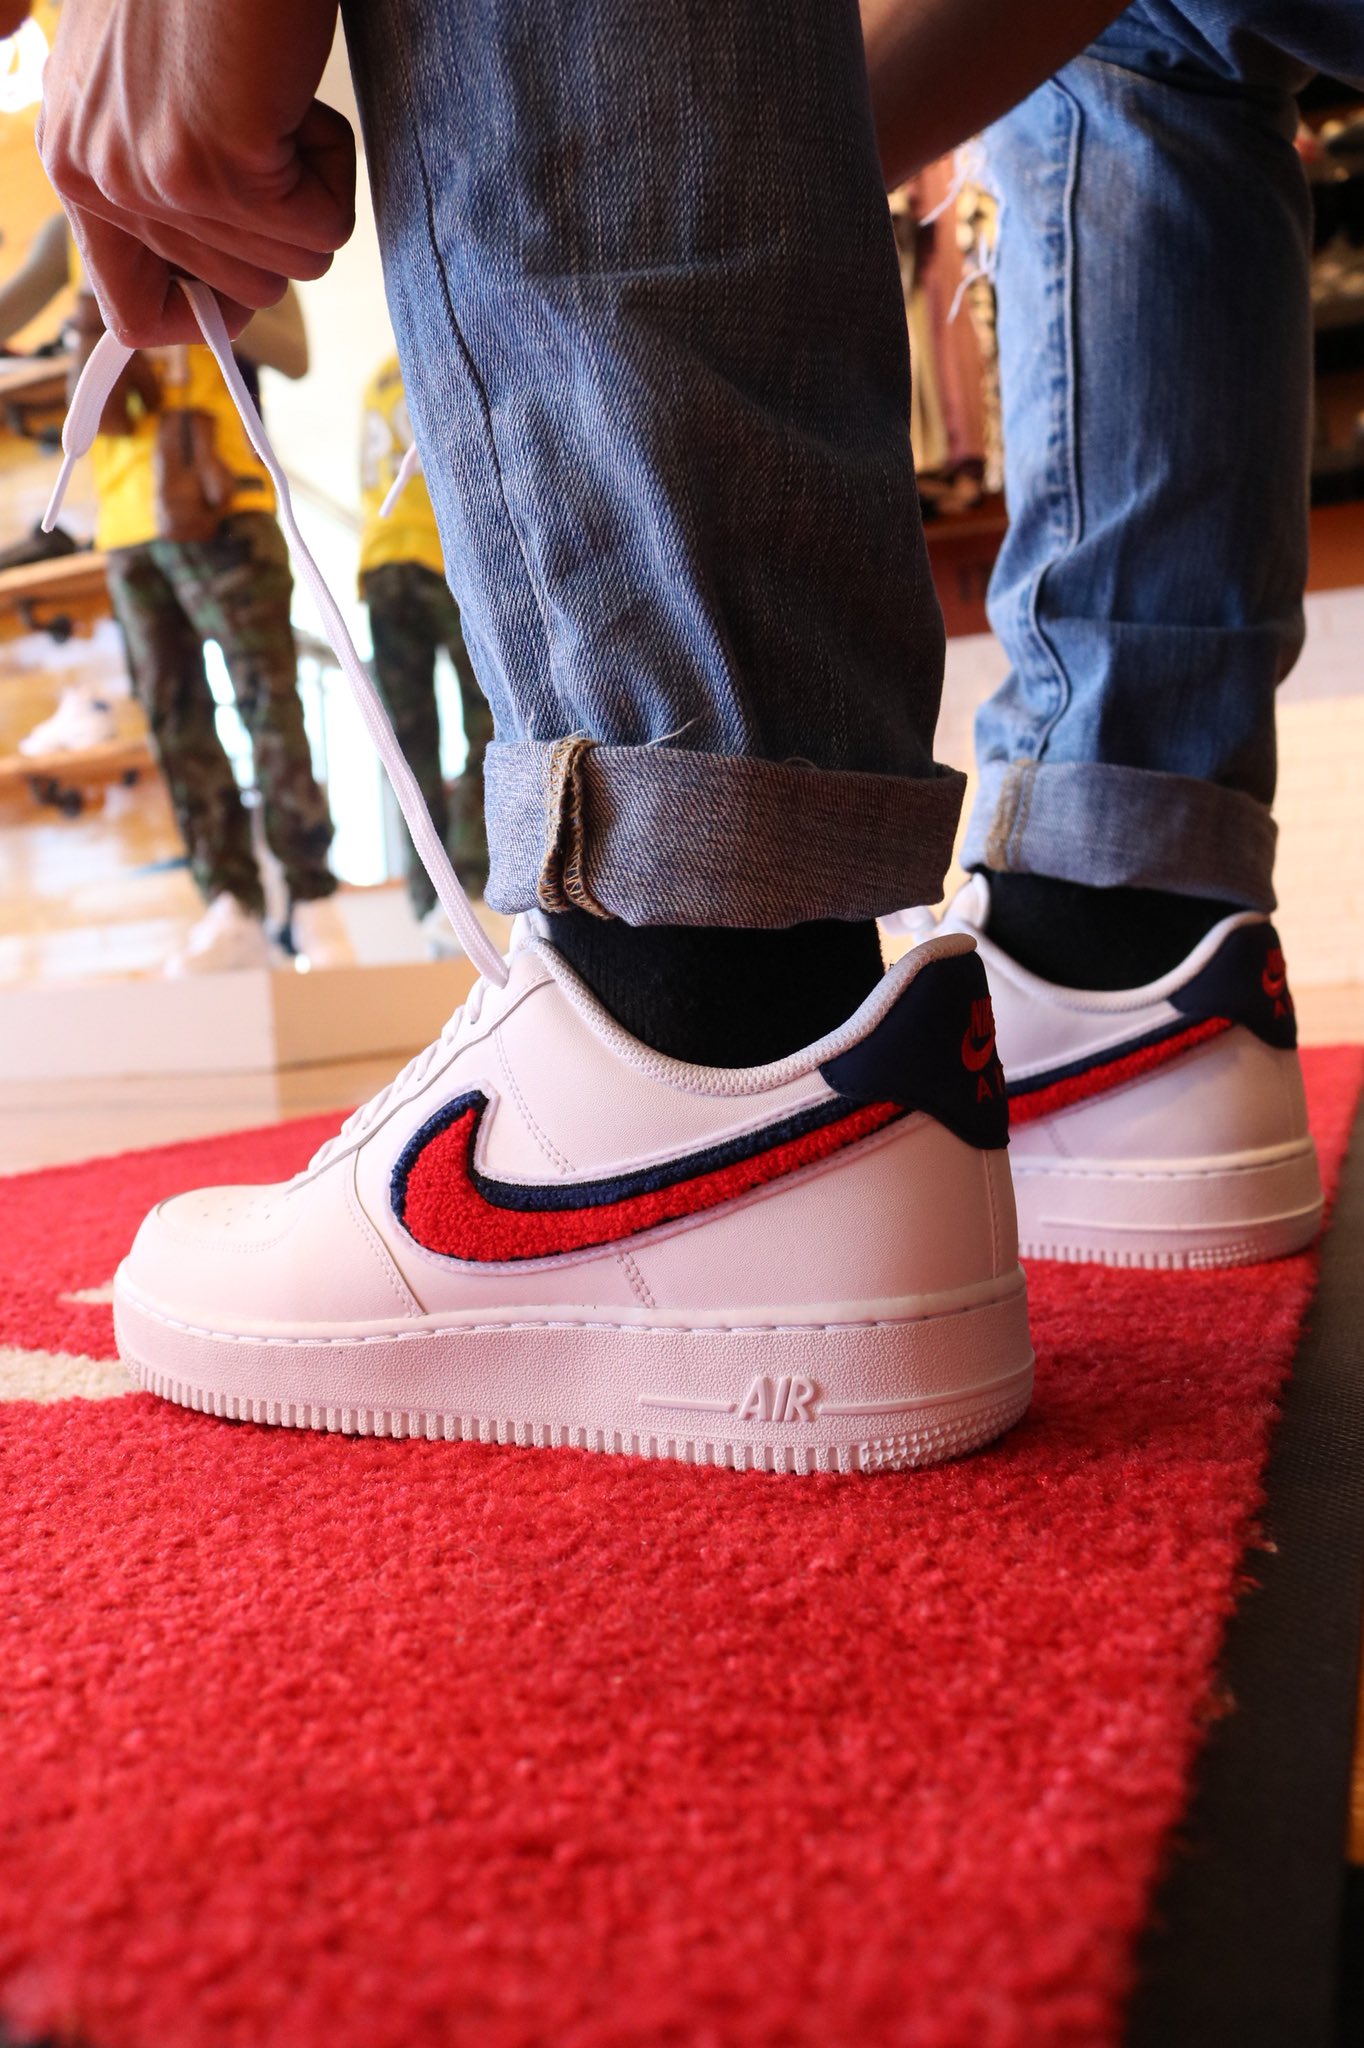 presentation Source Discover Renarts on Twitter: "Nike Air Force 1 🇺🇸Low 07 LV8 “Chenille Swoosh”  🔴🔵⚪️ https://t.co/Od1oKPUU6d https://t.co/oGvef25Hb6" / Twitter